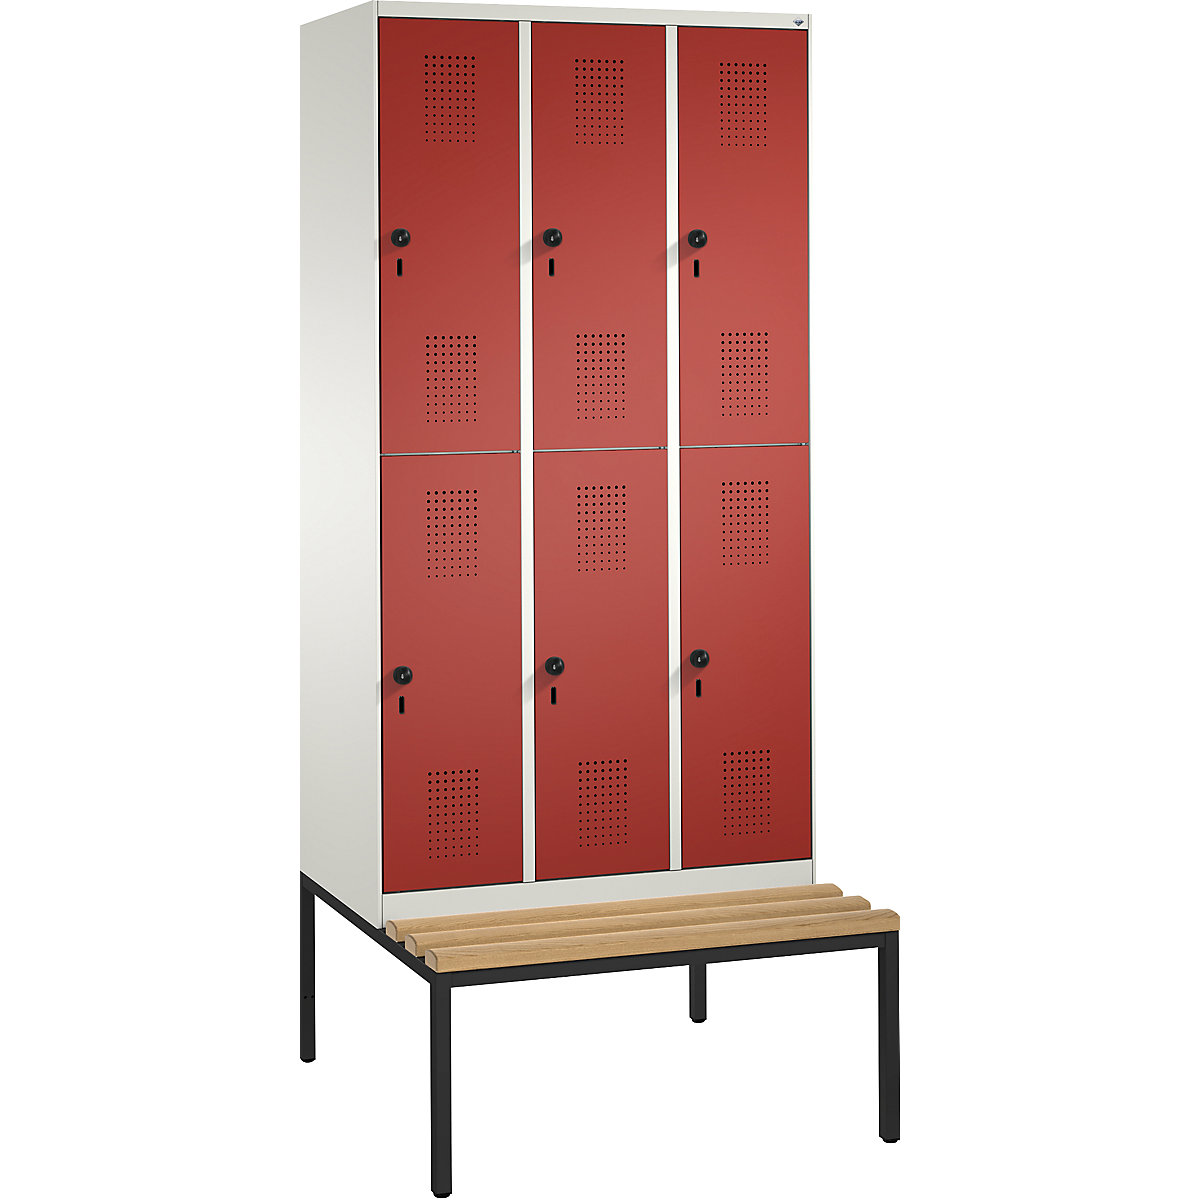 EVOLO cloakroom locker, double tier, with bench – C+P, 3 compartments, 2 shelf compartments each, compartment width 300 mm, pure white / flame red-11